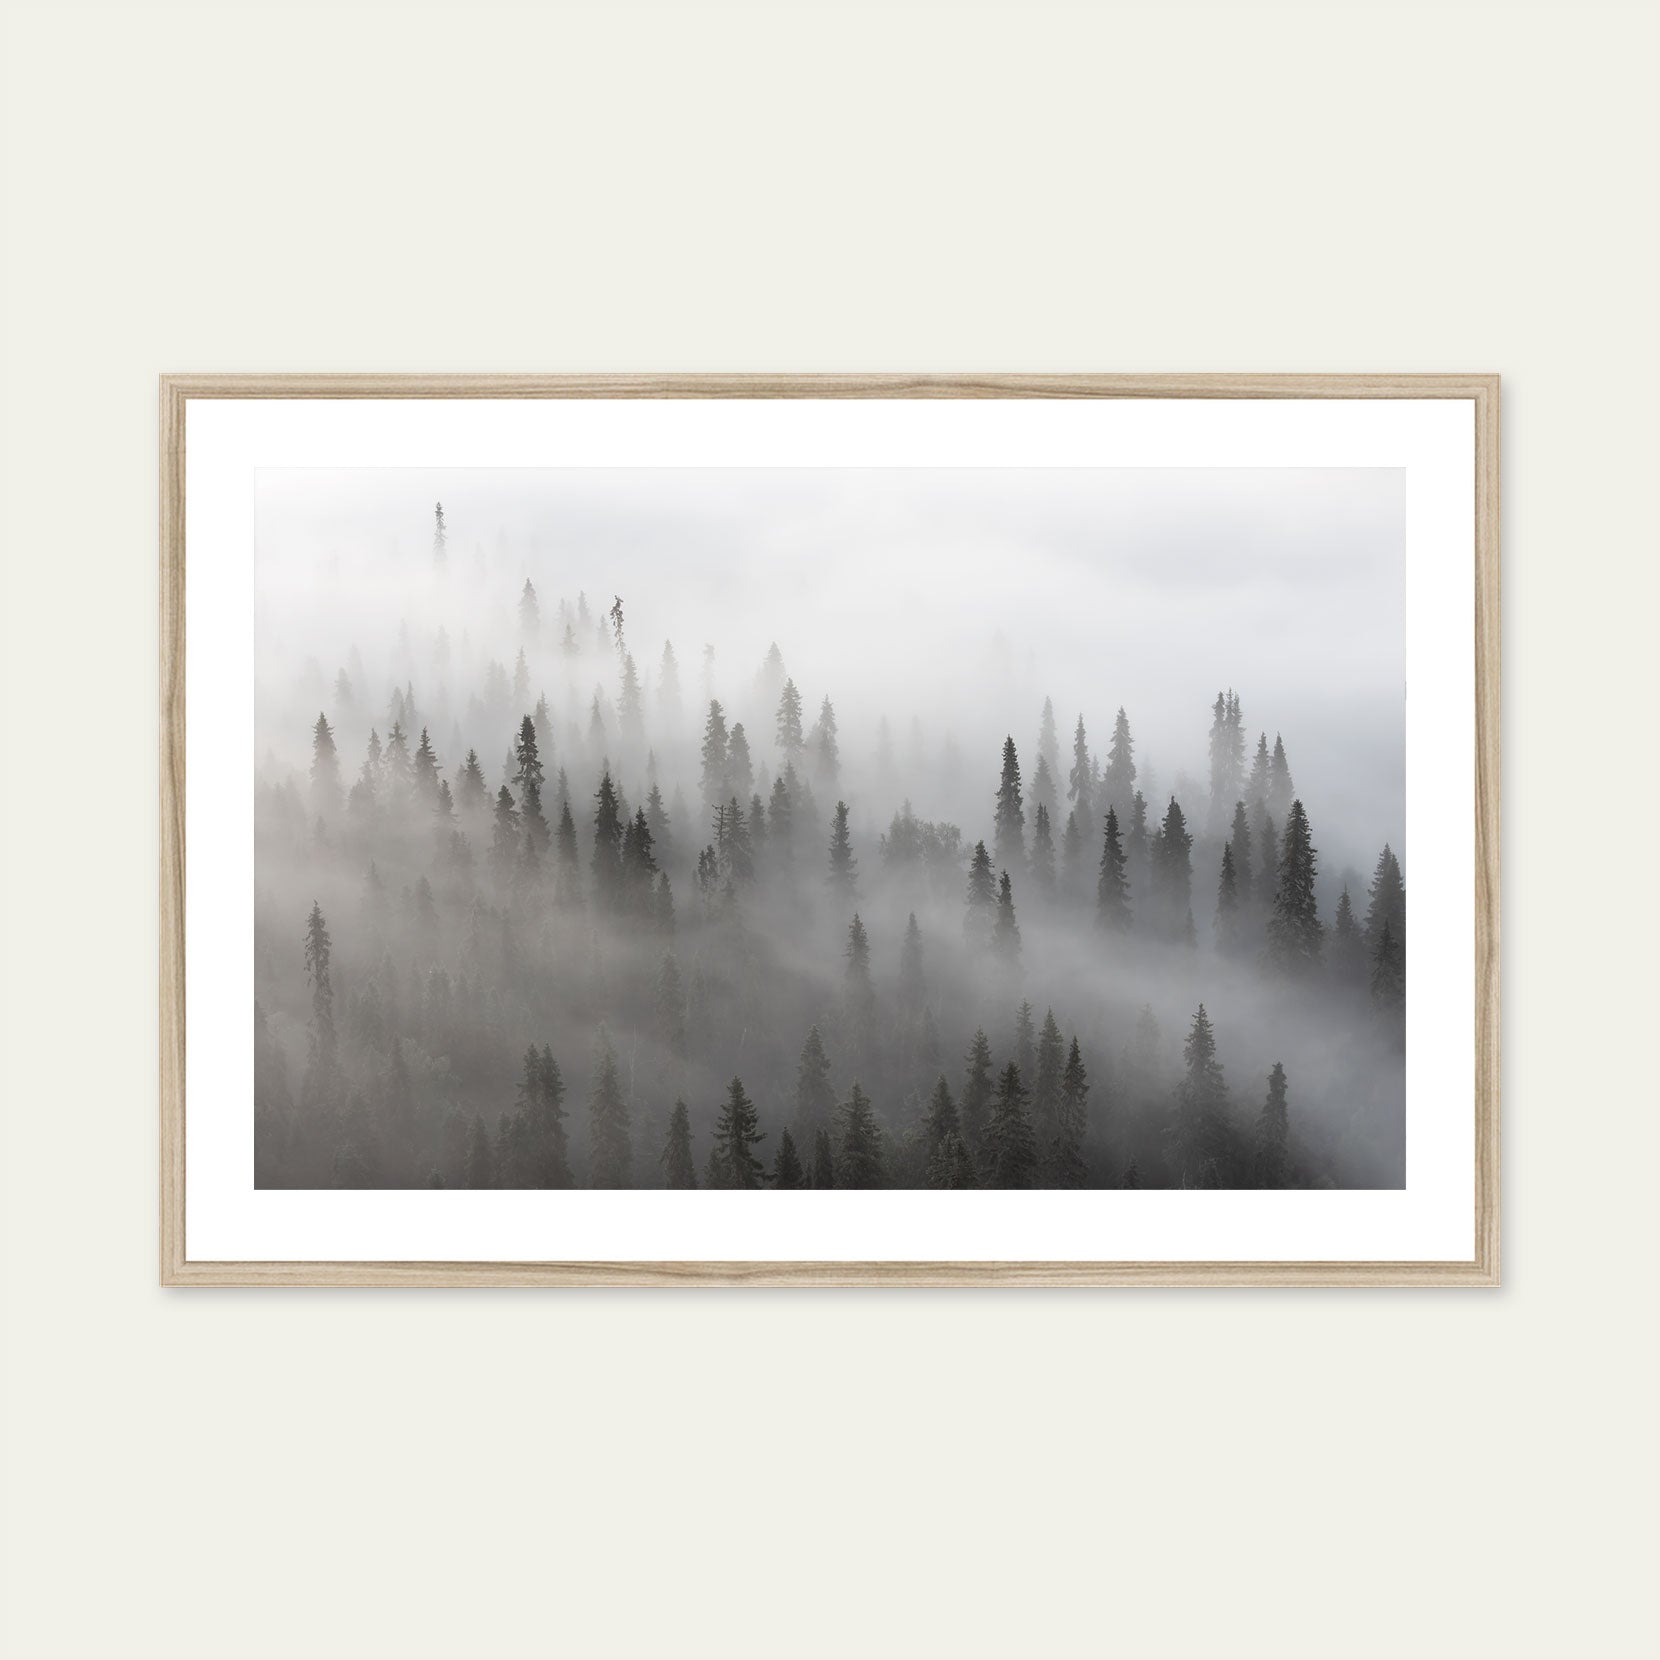 A wood framed print of a forest with lingering fog